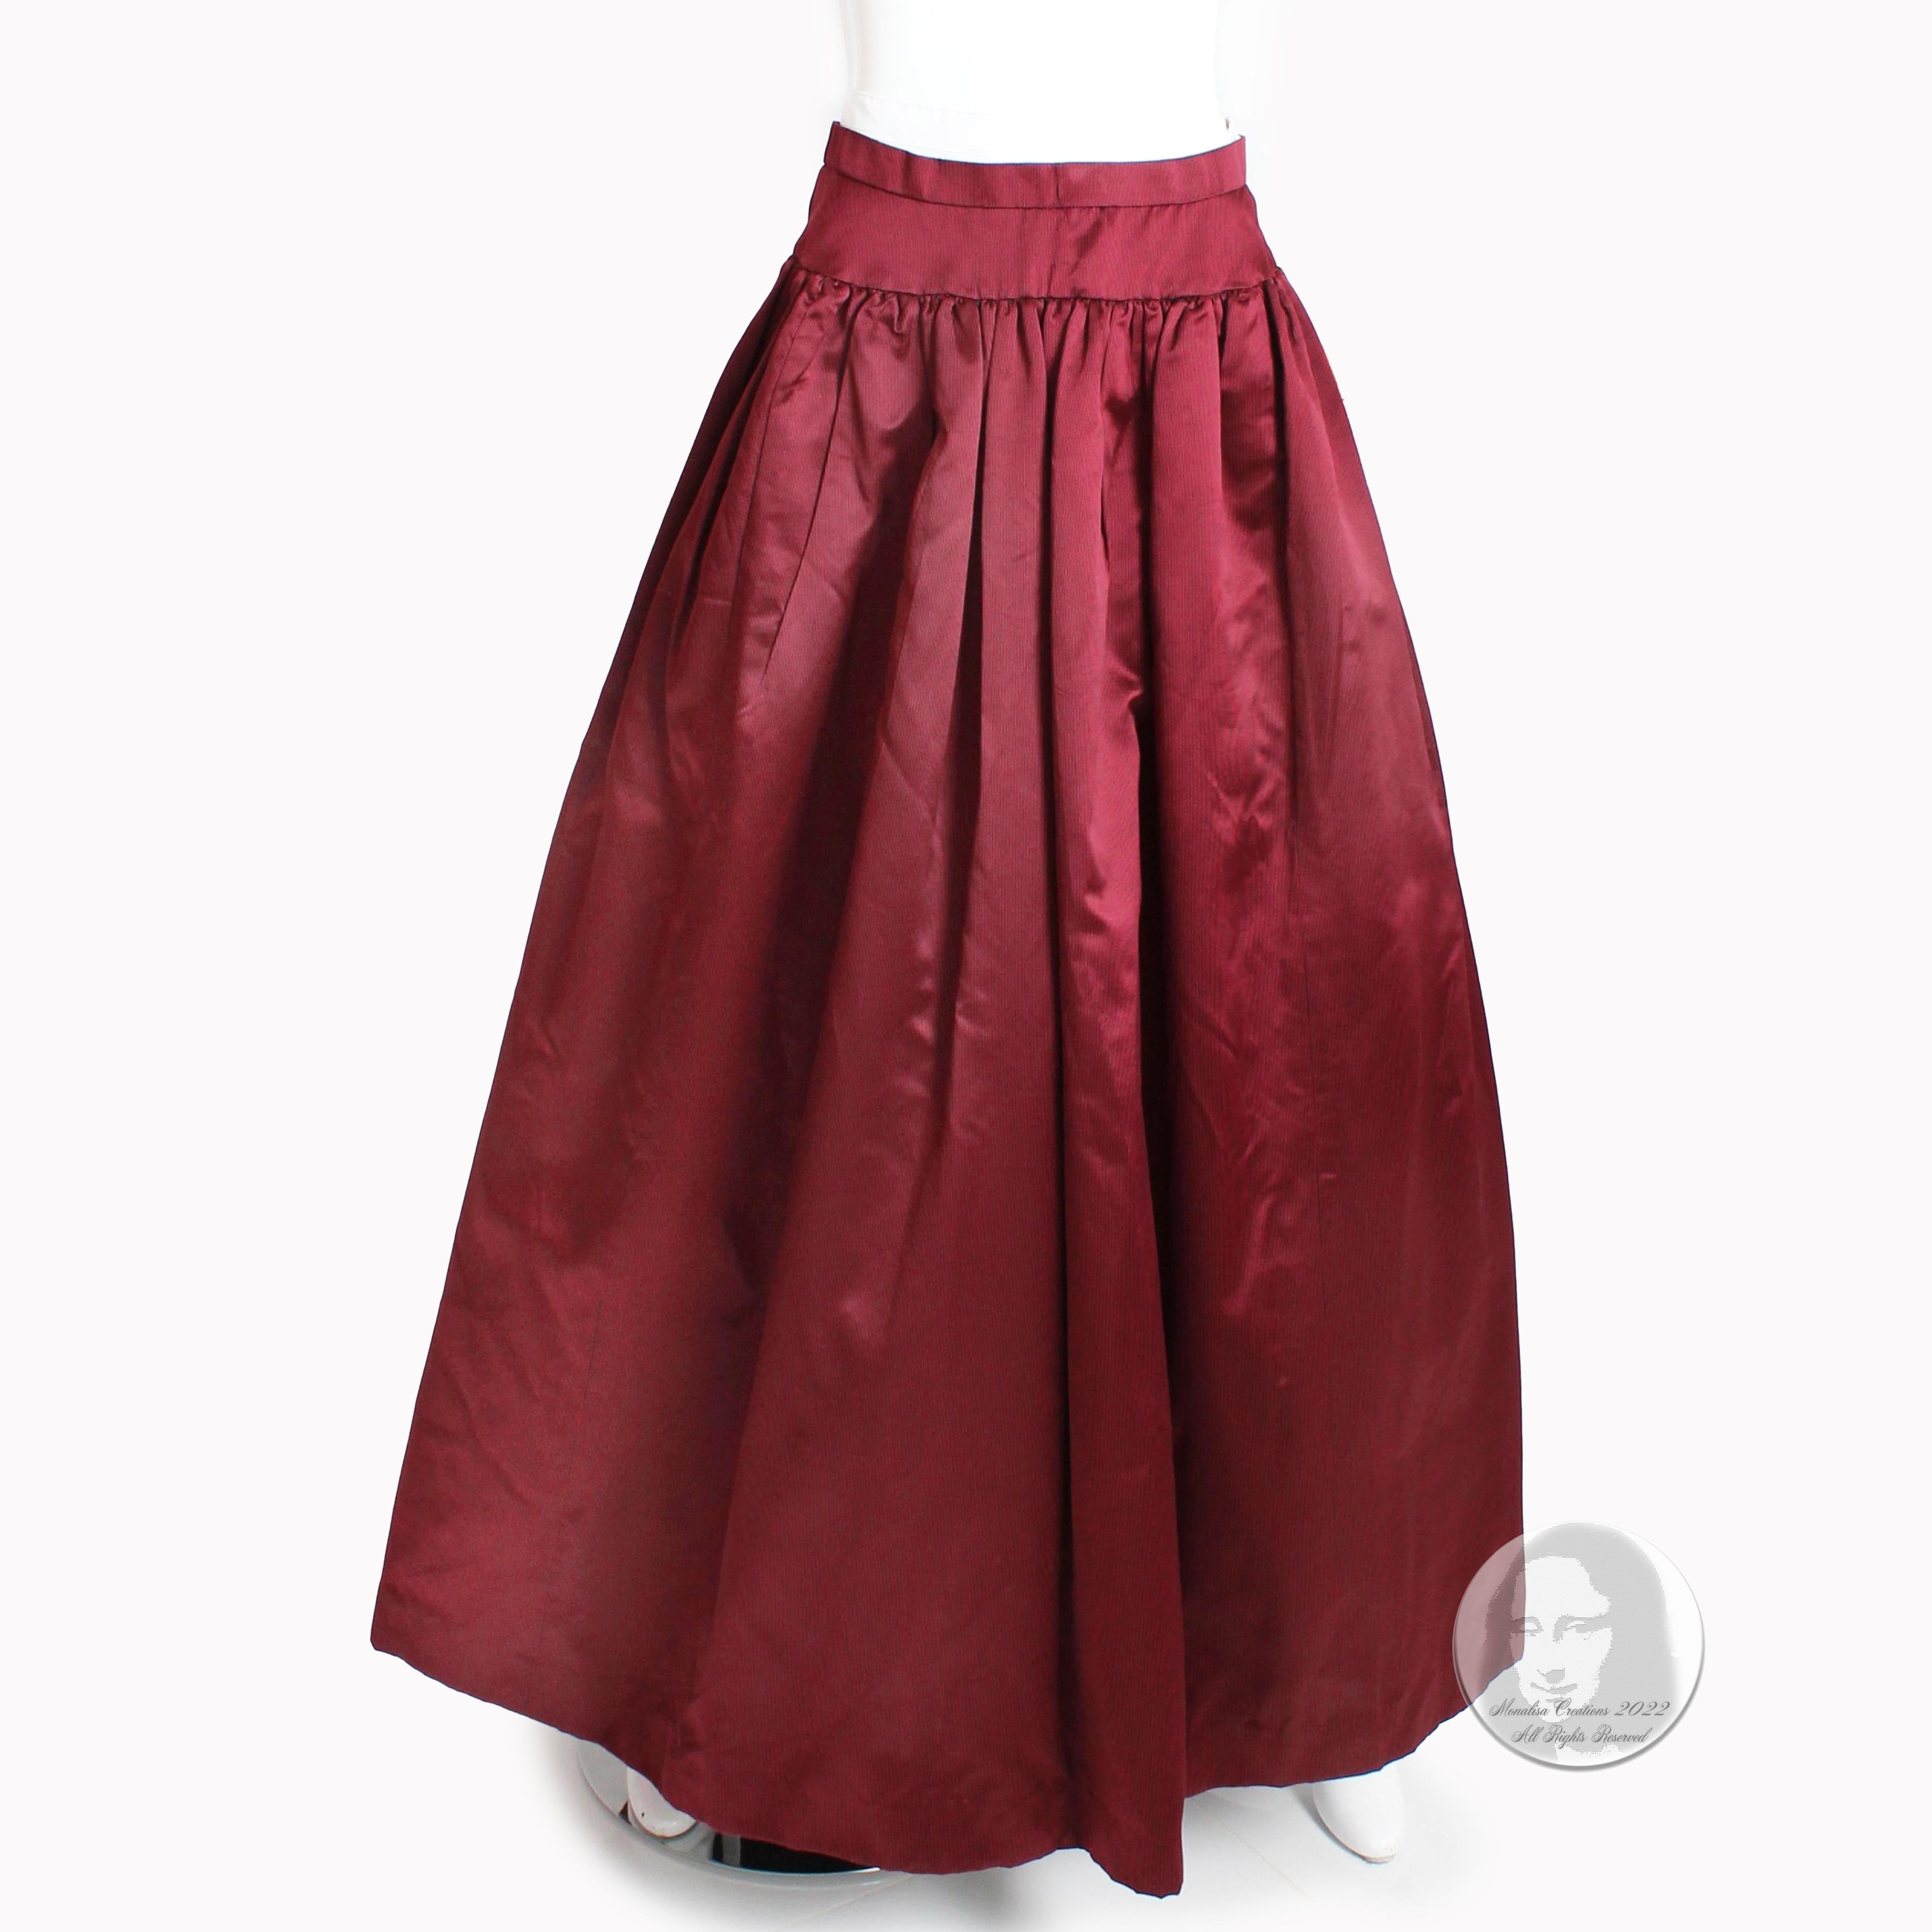 Authentic, preowned, vintage 70s Oscar de la Rental Long Formal Skirt with thin pinstripe pattern in red/black (see close up image of fabric). Looks amazing with our vintage sheared beaver cape, (as shown in pic 7, shown for styling inspiration but